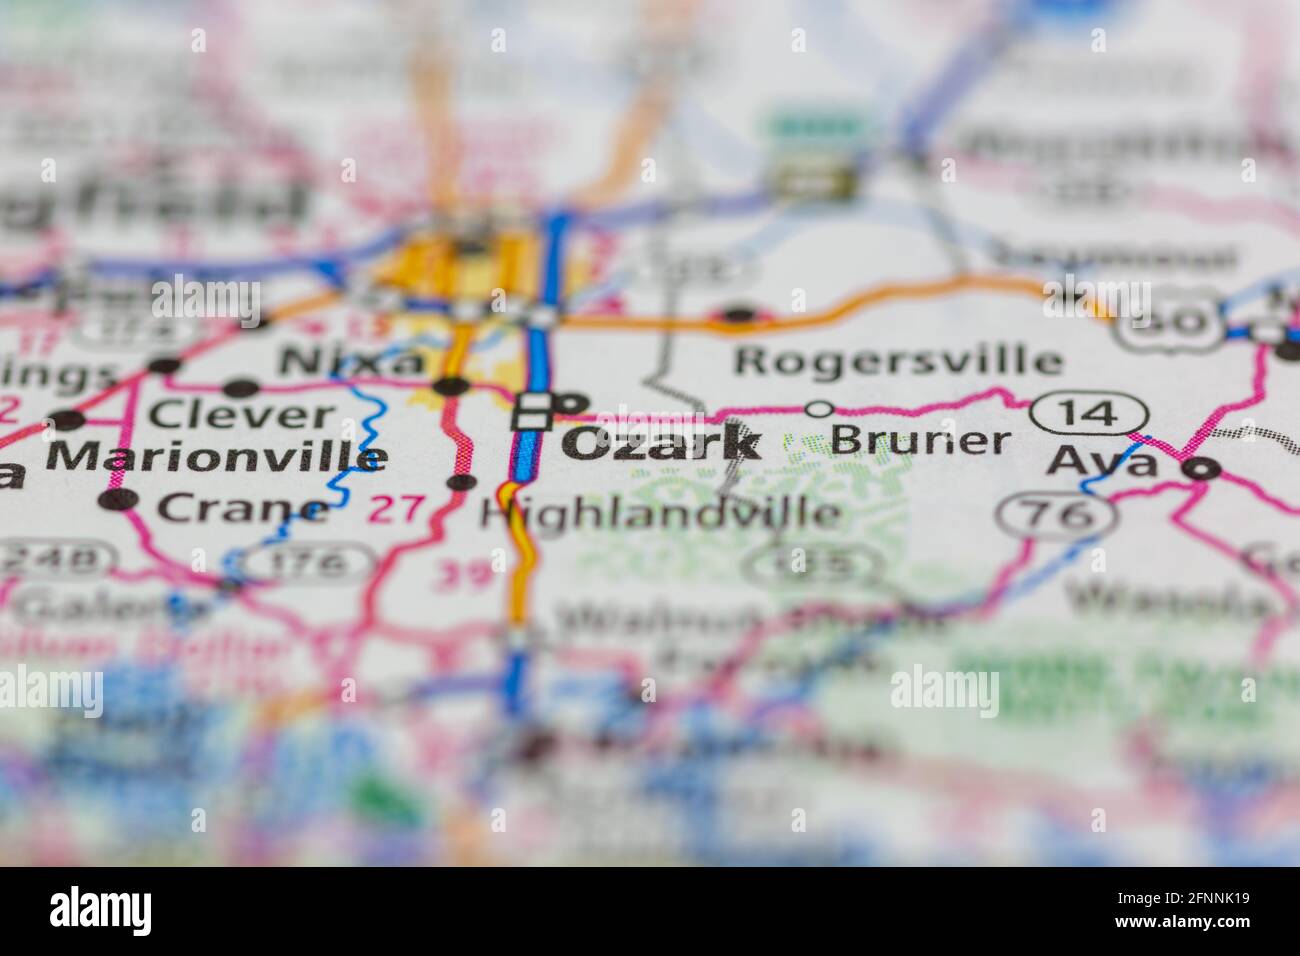 Ozark Missouri USA shown on a Geography map or road map Stock Photo